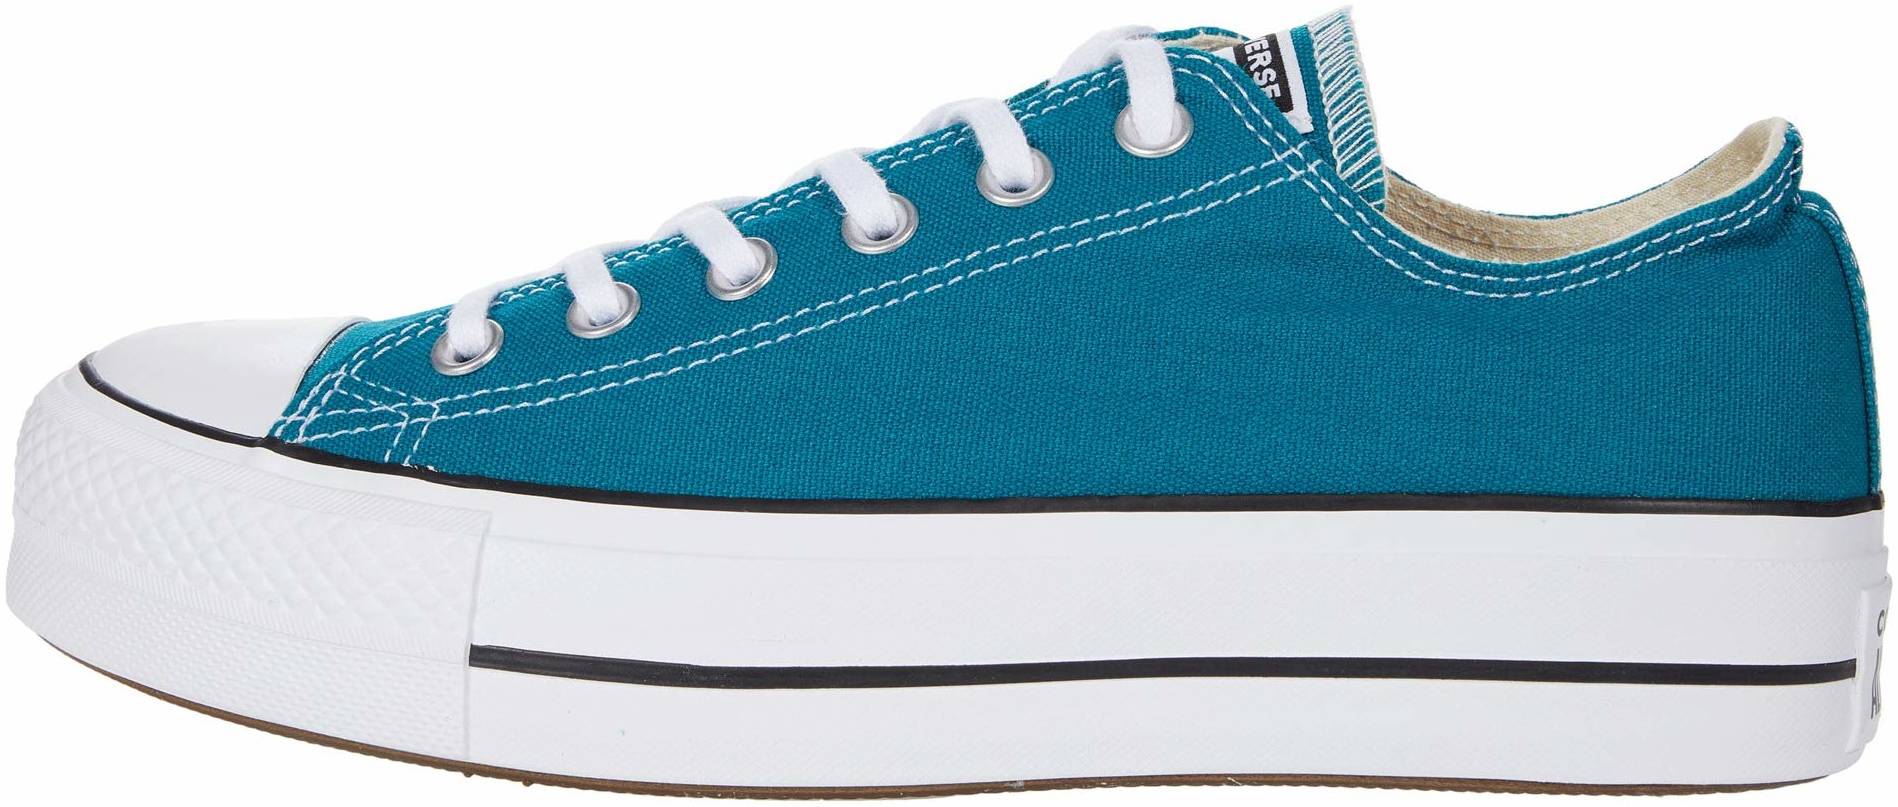 converse all star shoes blue